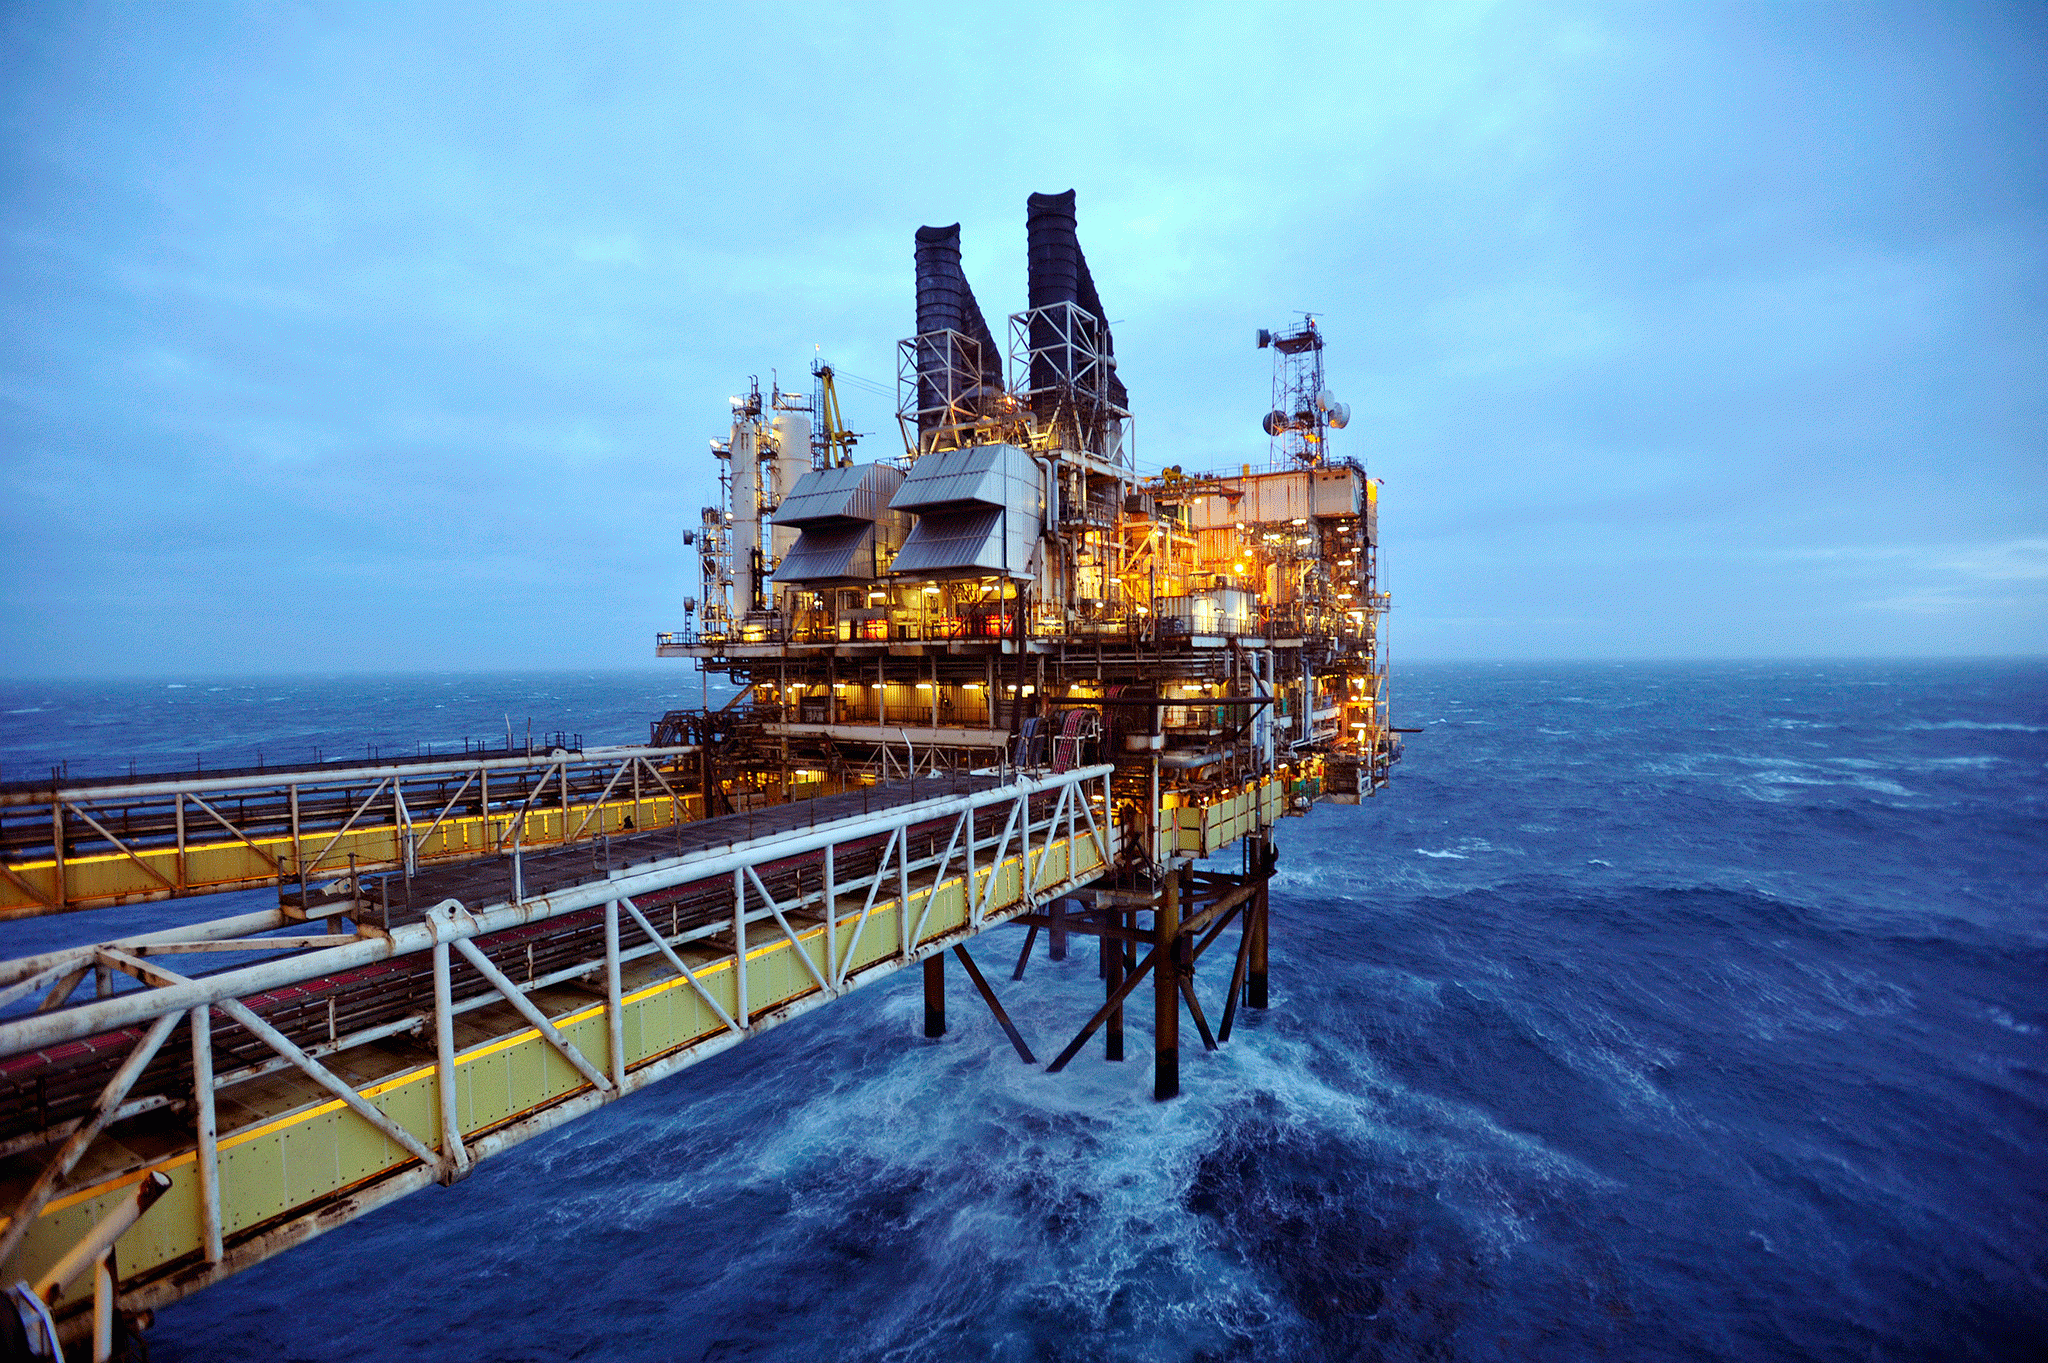 North Sea oil is not profitable at today's low oil price